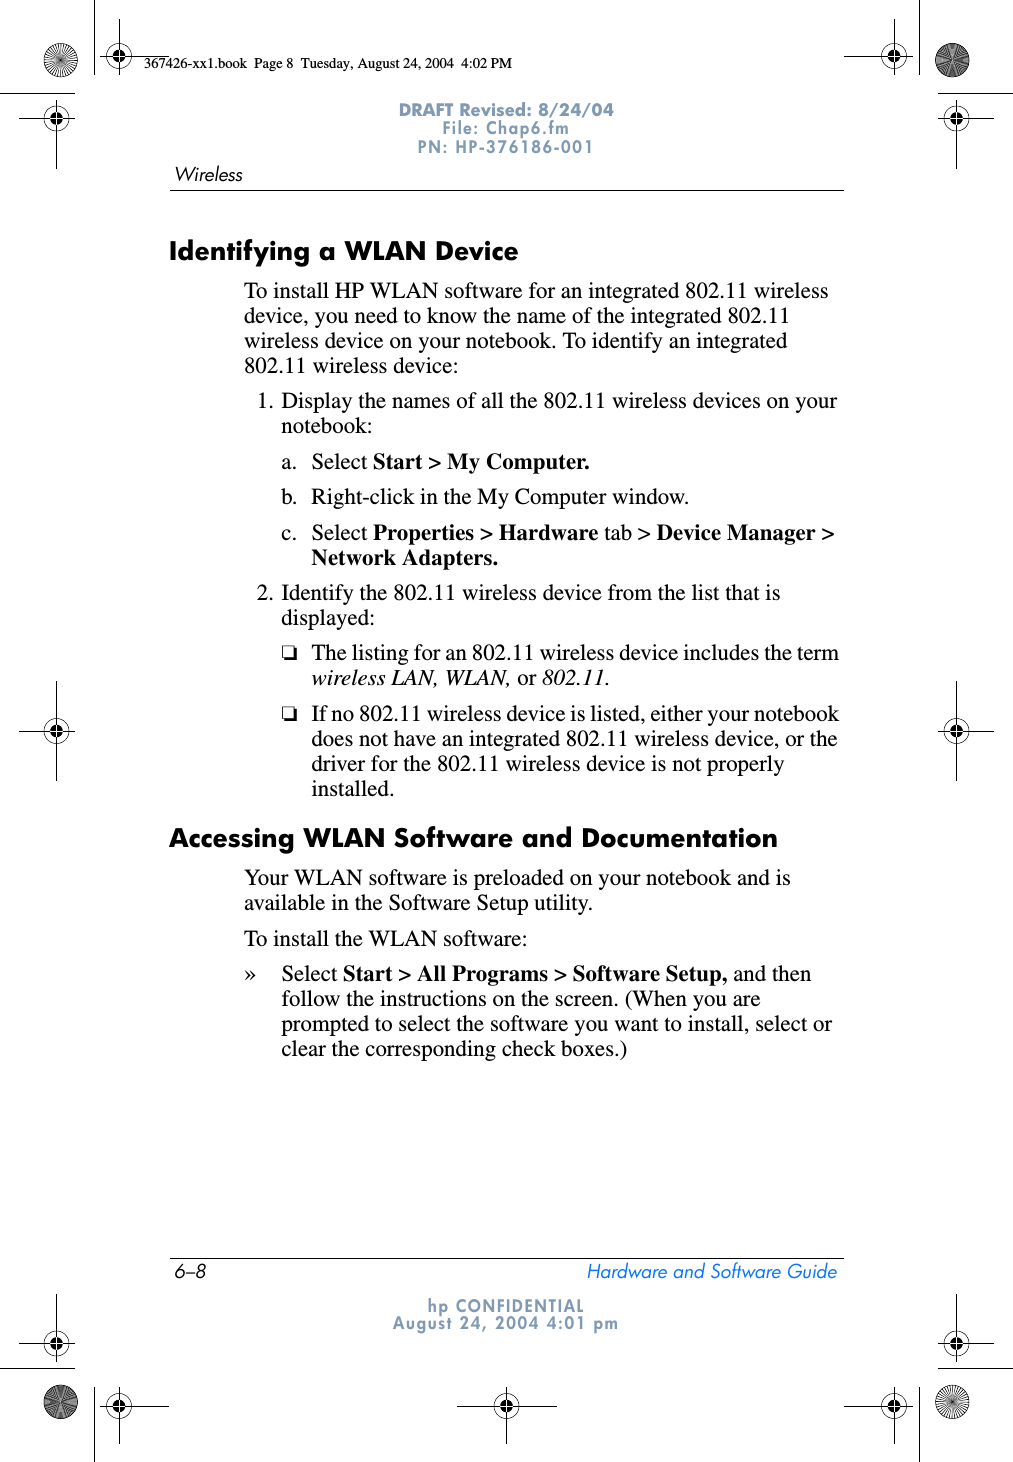 6–8 Hardware and Software GuideWirelessDRAFT Revised: 8/24/04File: Chap6.fm PN: HP-376186-001 hp CONFIDENTIALAugust 24, 2004 4:01 pmIdentifying a WLAN DeviceTo install HP WLAN software for an integrated 802.11 wireless device, you need to know the name of the integrated 802.11 wireless device on your notebook. To identify an integrated 802.11 wireless device:1. Display the names of all the 802.11 wireless devices on your notebook: a. Select Start &gt; My Computer.b. Right-click in the My Computer window.c. Select Properties &gt; Hardware tab &gt; Device Manager &gt; Network Adapters.2. Identify the 802.11 wireless device from the list that is displayed:❏The listing for an 802.11 wireless device includes the term wireless LAN, WLAN, or 802.11.❏If no 802.11 wireless device is listed, either your notebook does not have an integrated 802.11 wireless device, or the driver for the 802.11 wireless device is not properly installed.Accessing WLAN Software and DocumentationYour WLAN software is preloaded on your notebook and is available in the Software Setup utility. To install the WLAN software:»Select Start &gt; All Programs &gt; Software Setup, and then follow the instructions on the screen. (When you are prompted to select the software you want to install, select or clear the corresponding check boxes.)367426-xx1.book  Page 8  Tuesday, August 24, 2004  4:02 PM